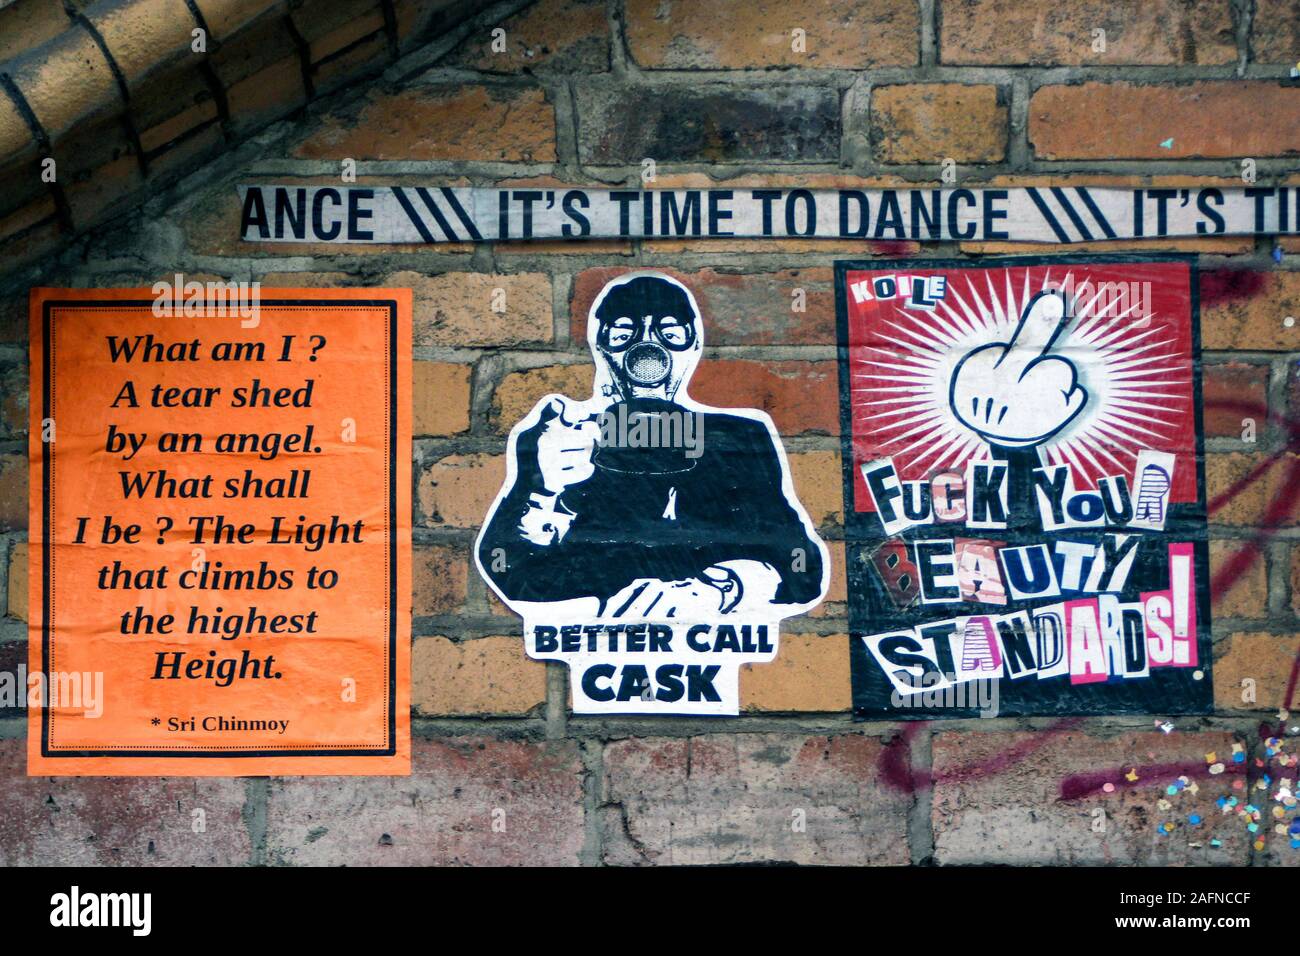 Paste-up wheatpaste posters in Berlin, Germany Stock Photo